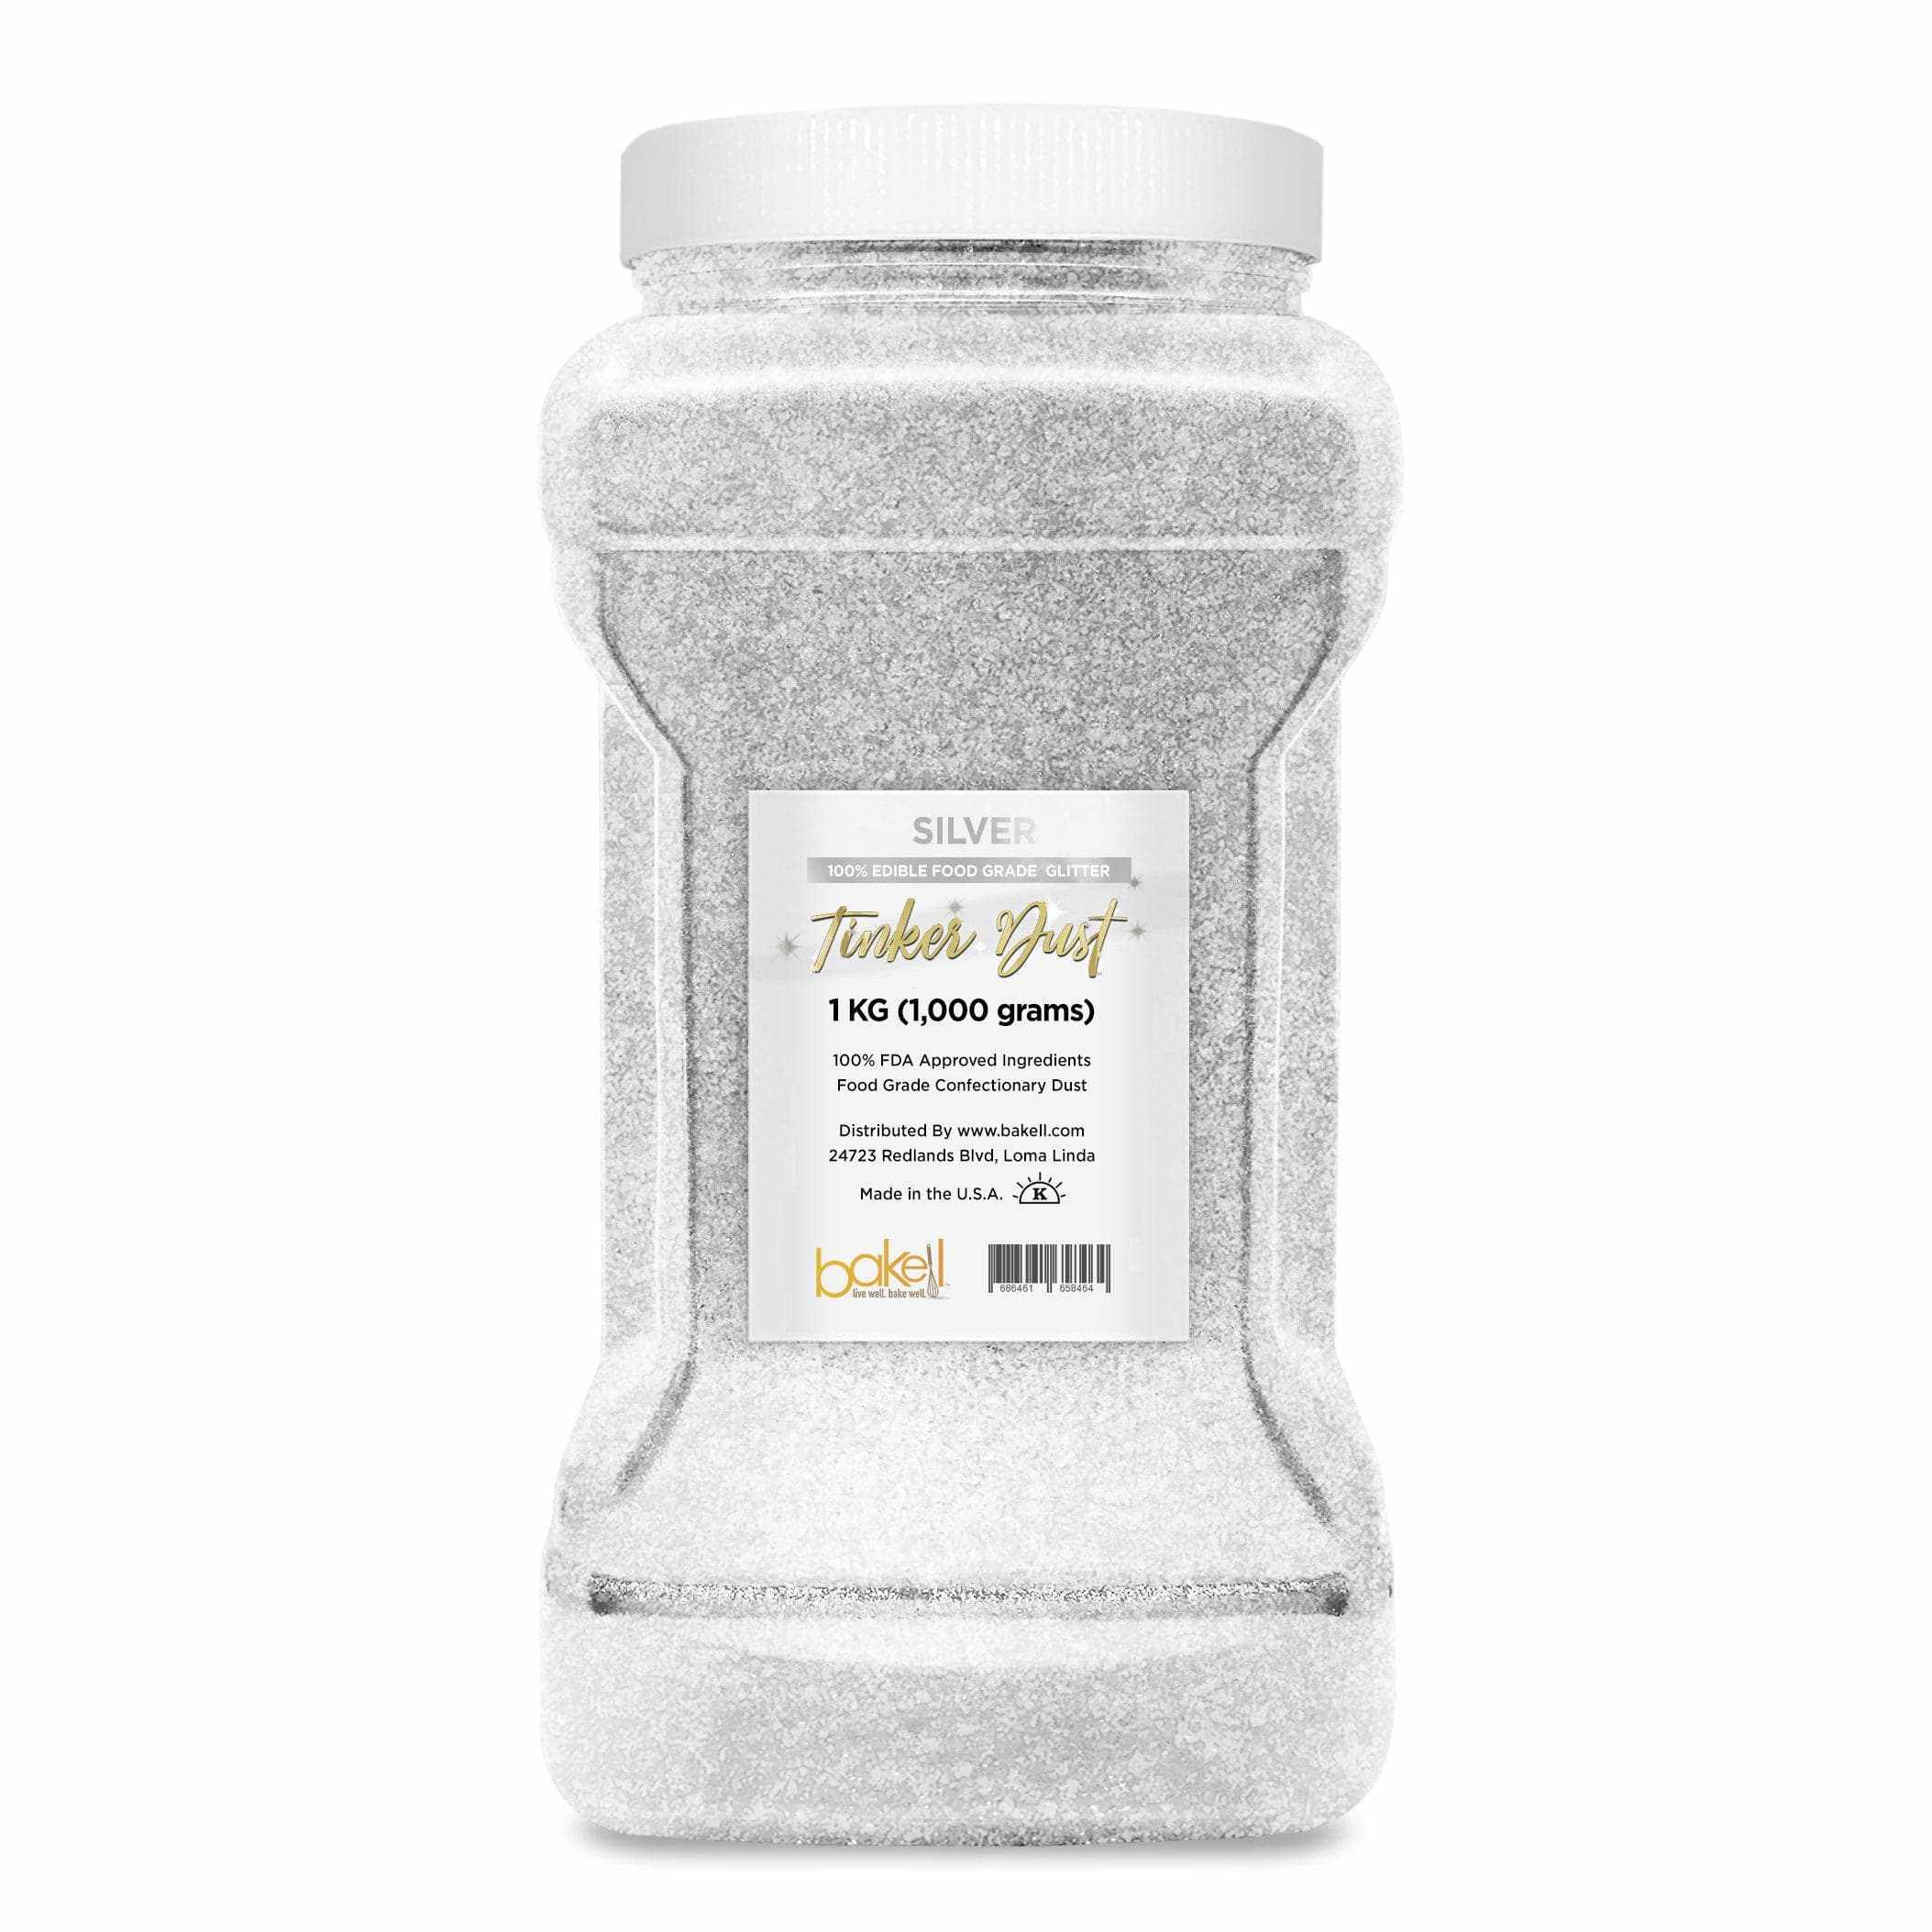 Silver Edible Tinker Dust | #1 Site for Edible Glitters & Dusts